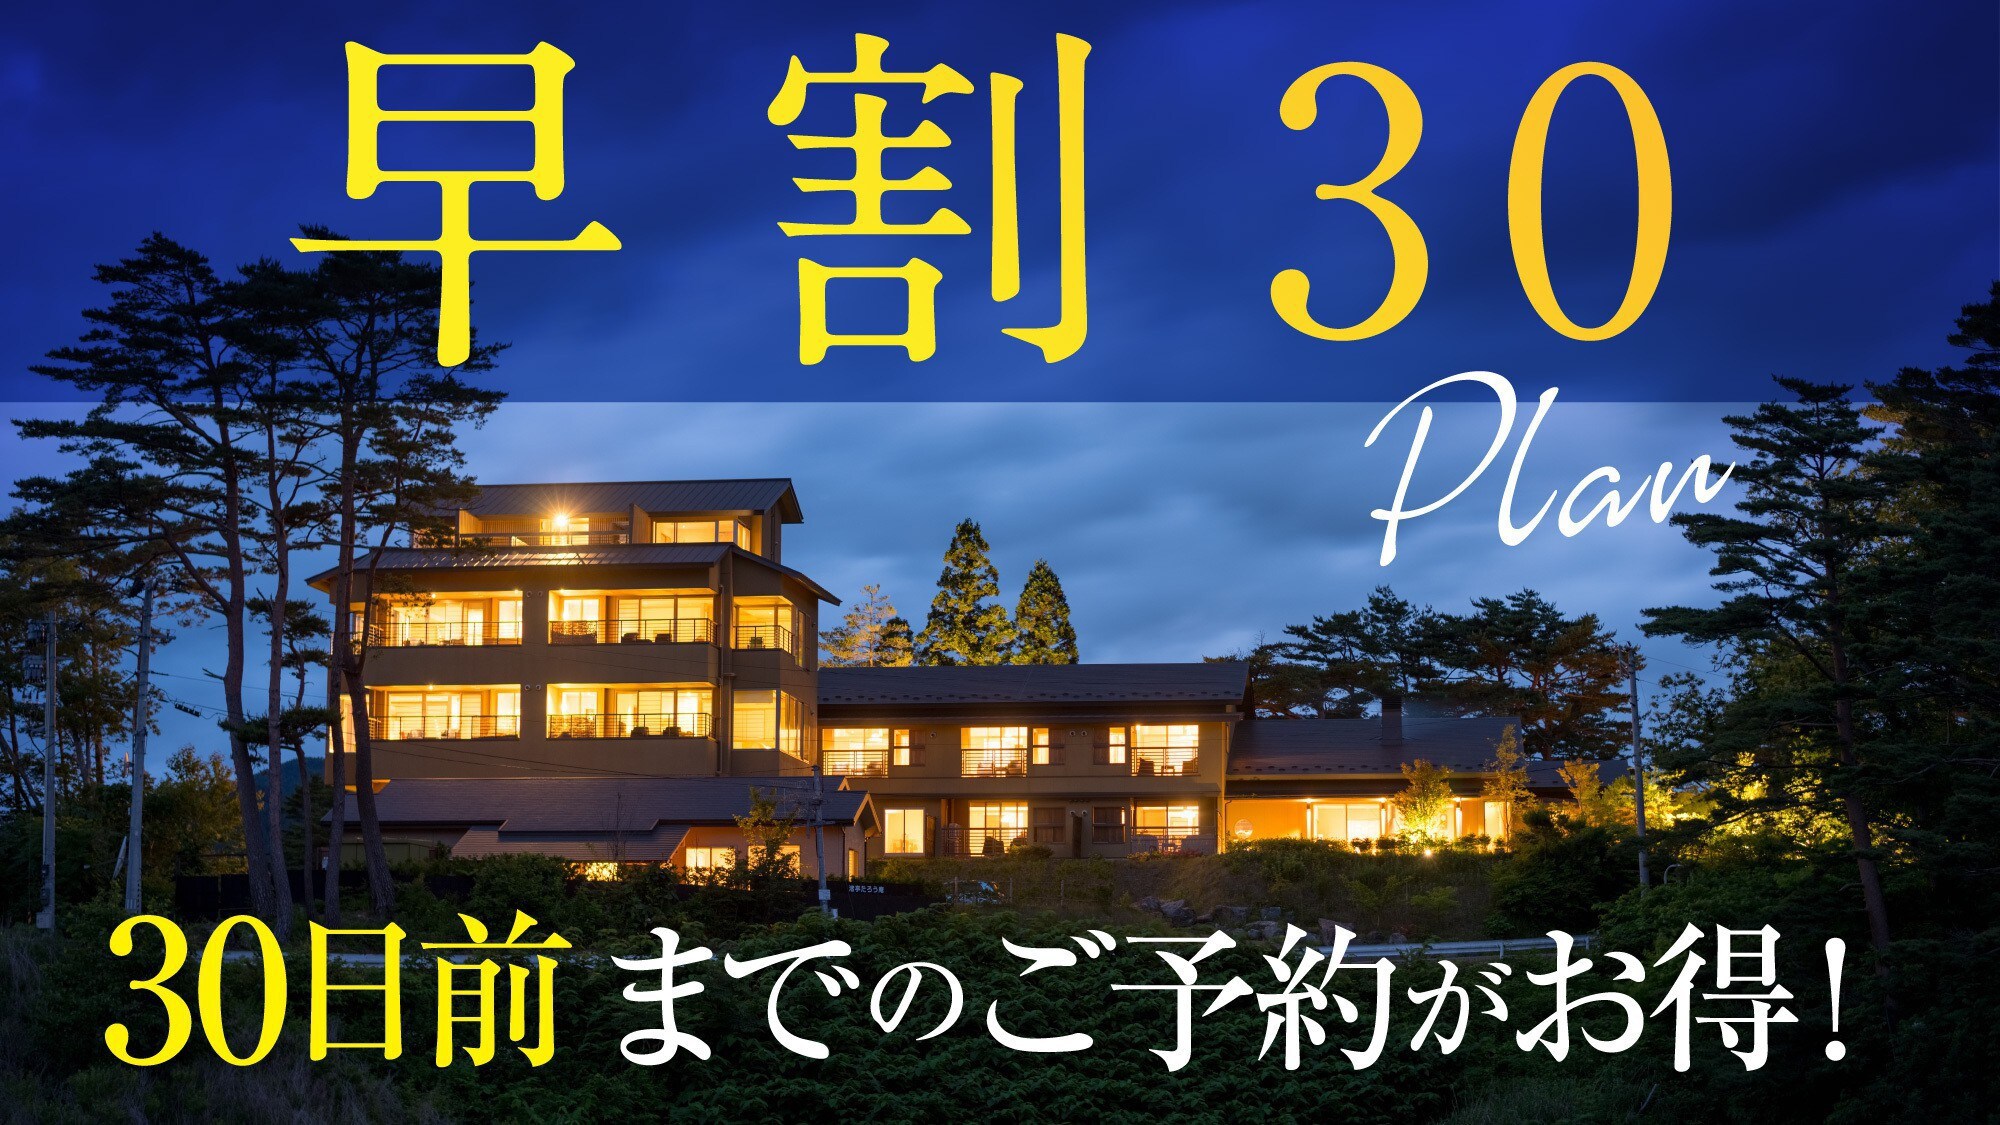 [Early Discount 30 Plan] Save up to 30 days before your stay!